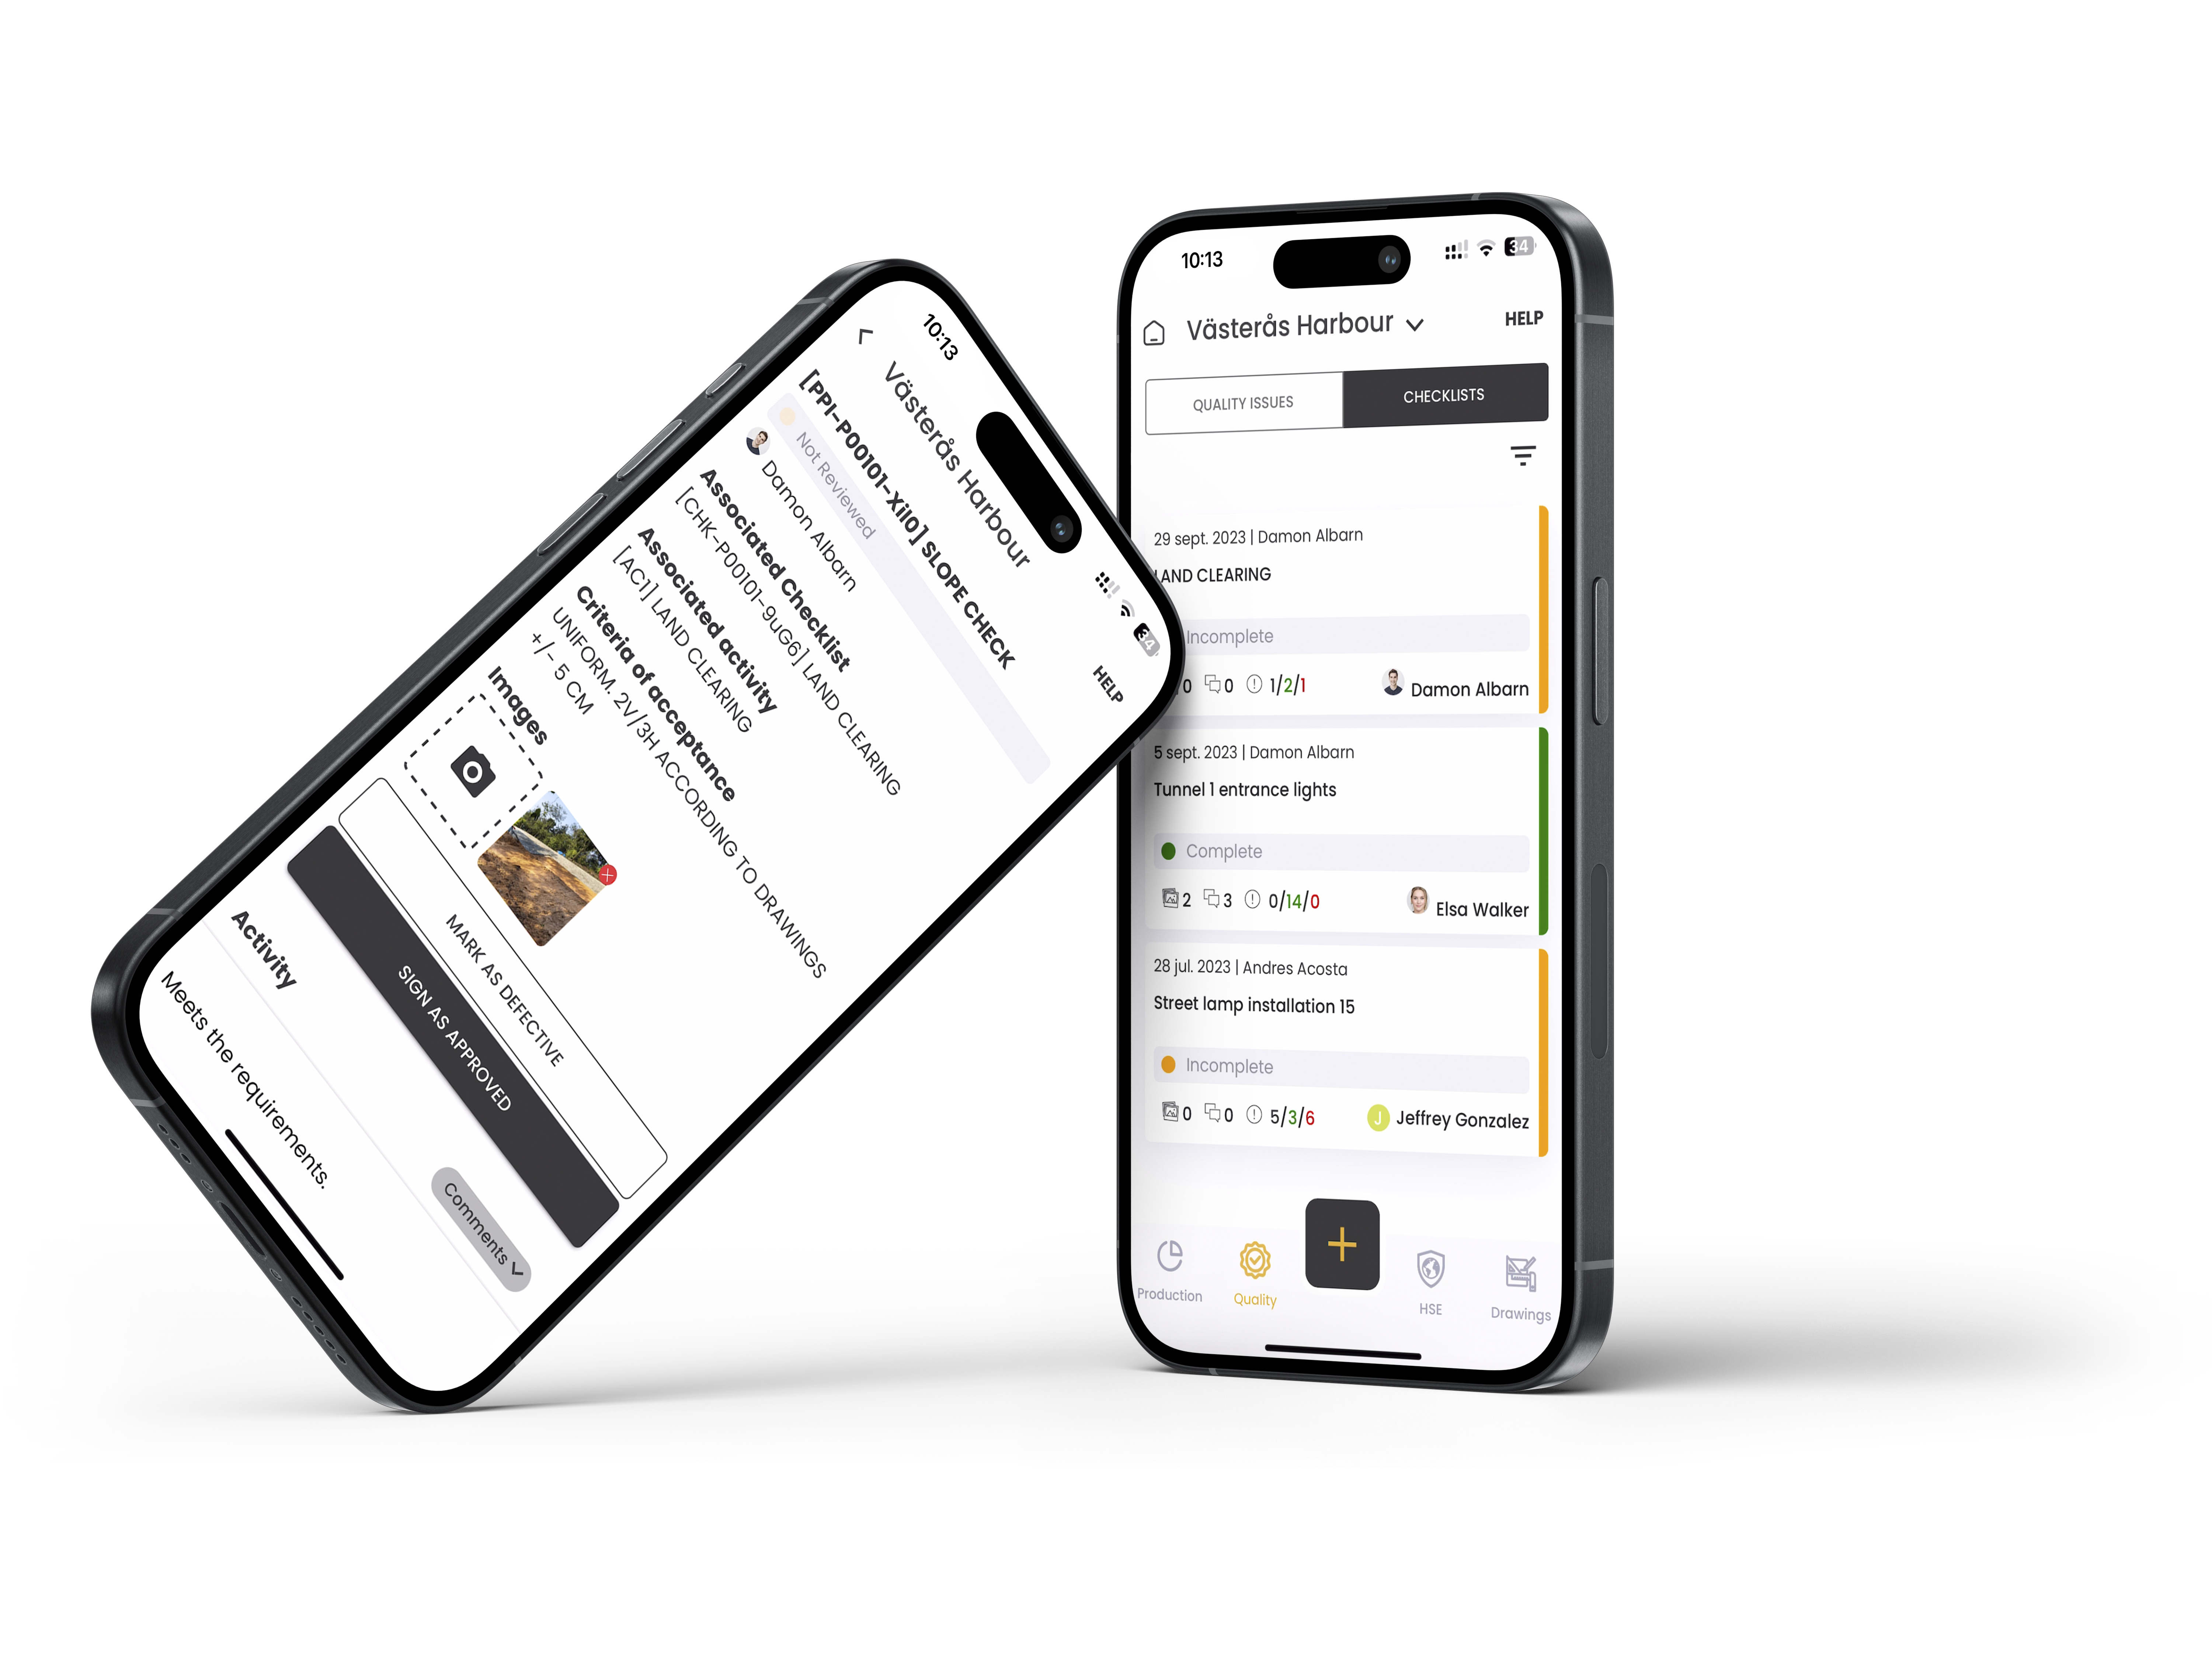 A mockup of one iPhone leaning against another iPhone. One screen shows when you try adding a checklists on the odei.io app, and the other screen shows the full checklists listing on the app.